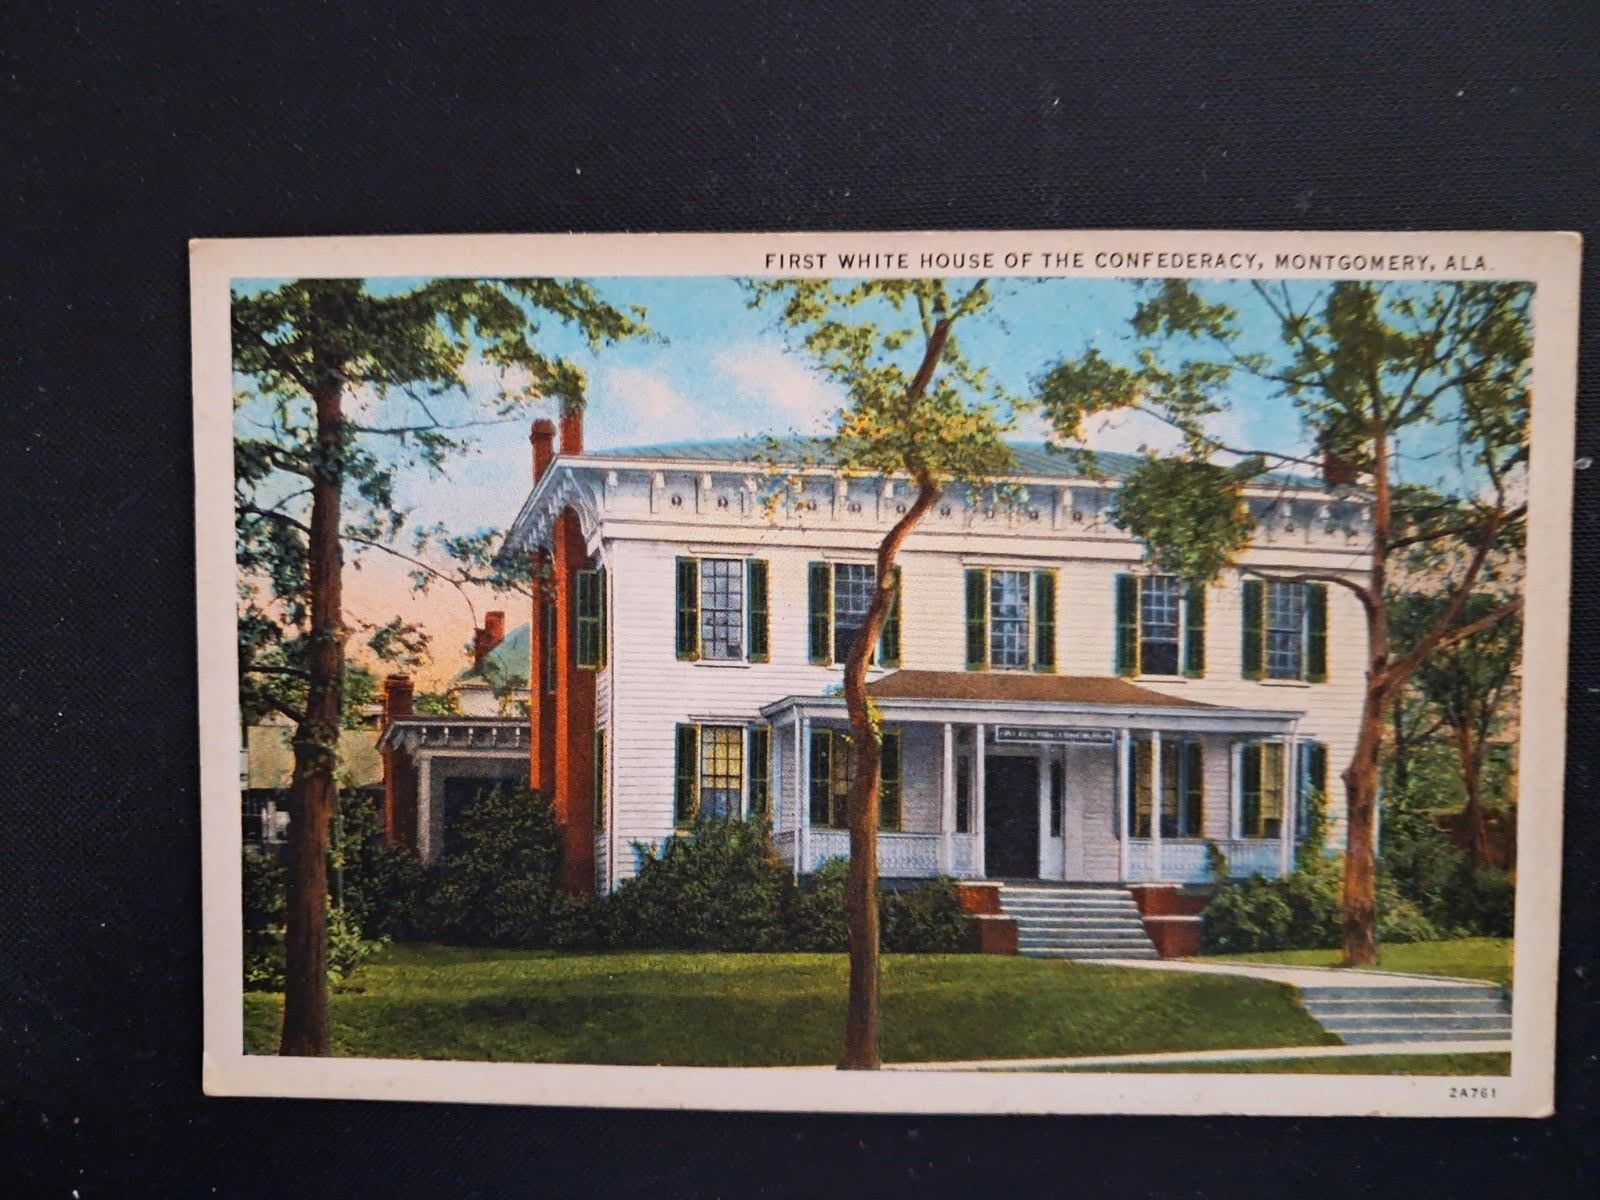 Vintage First White House of the Confederacy, Montgomery, ALA. Postcard